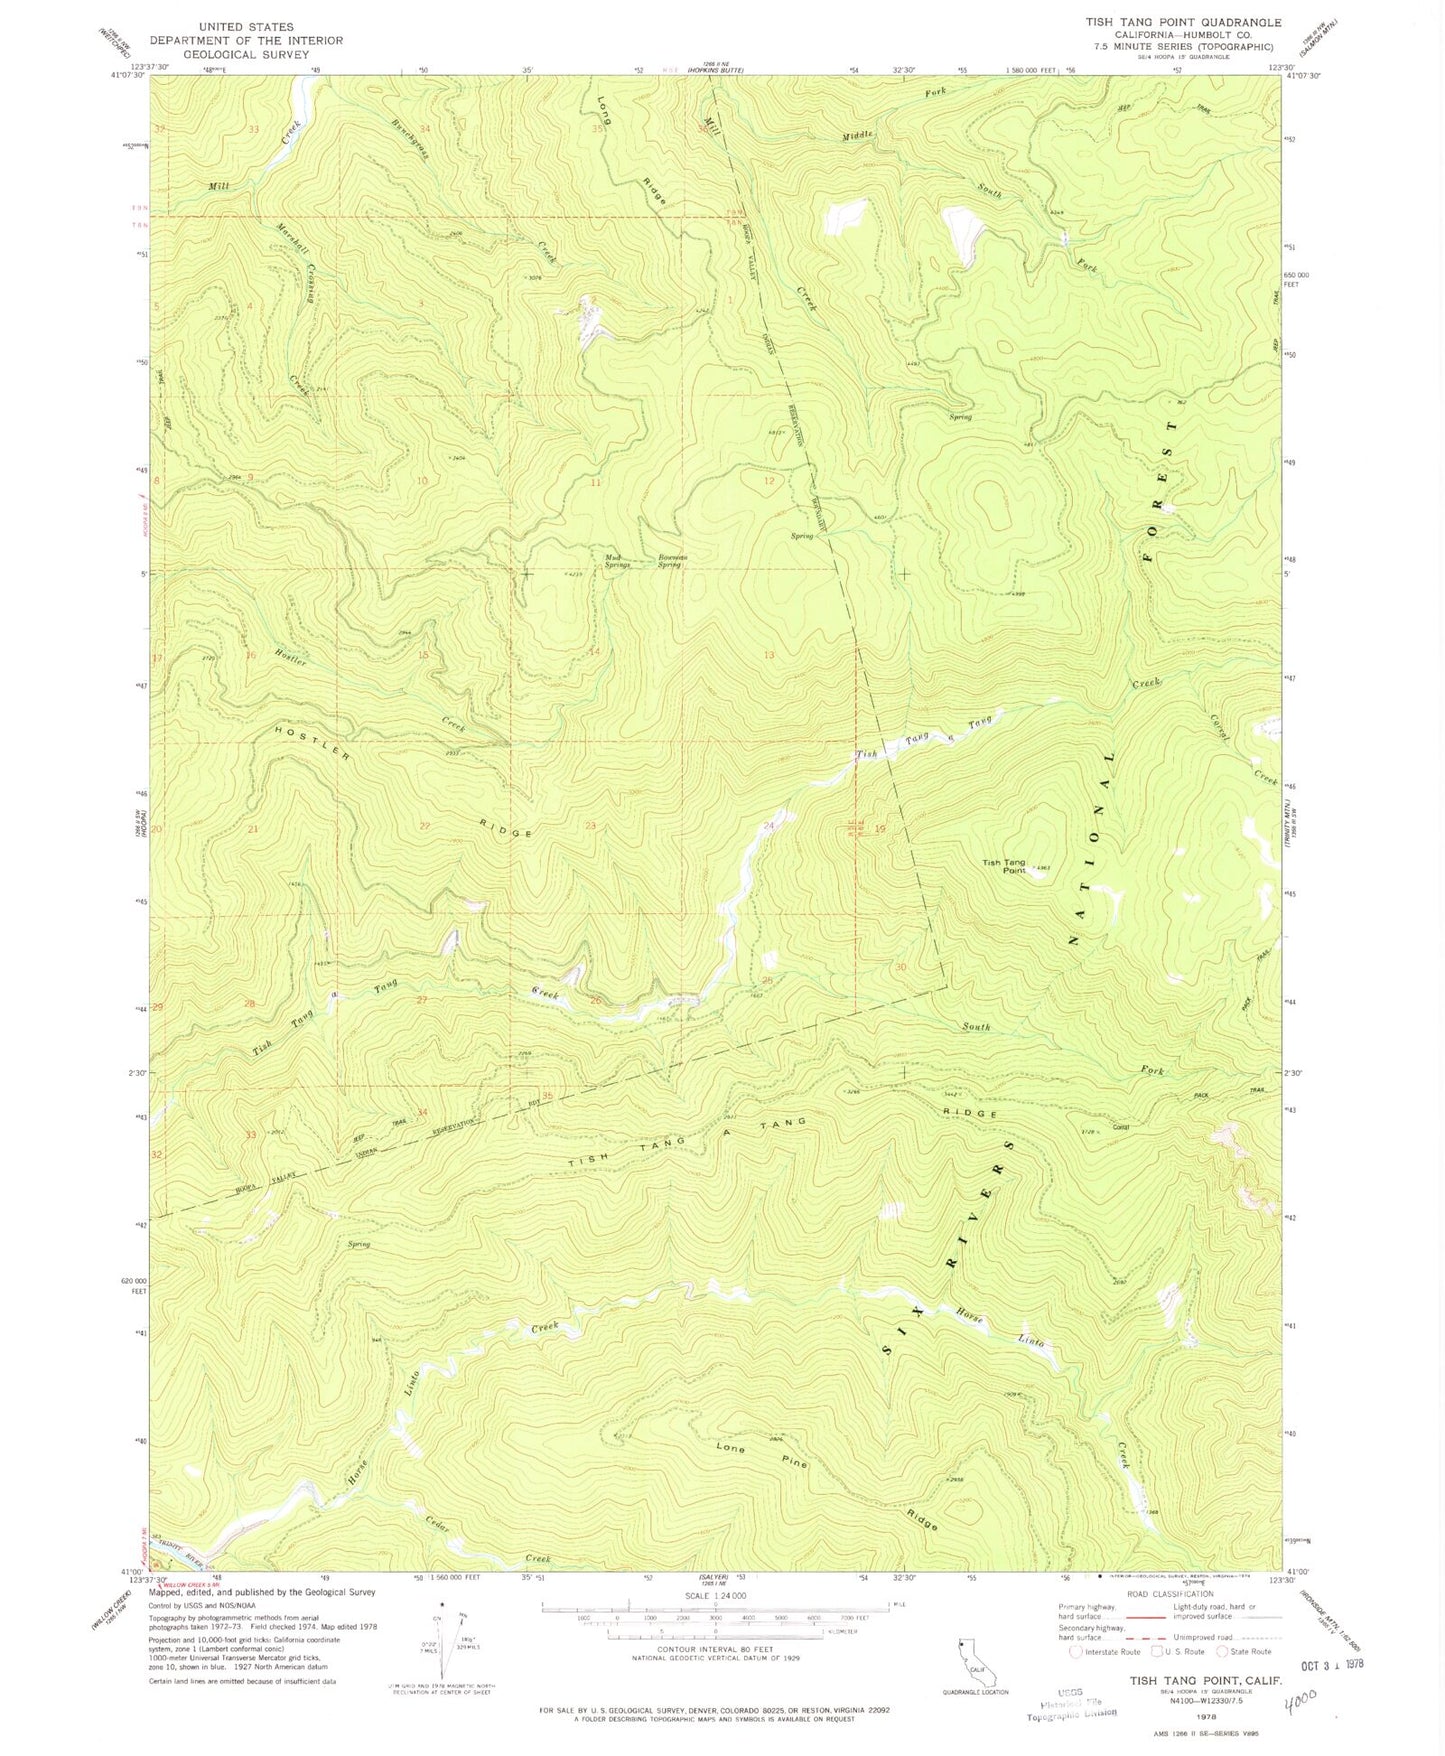 Classic USGS Tish Tang Point California 7.5'x7.5' Topo Map Image